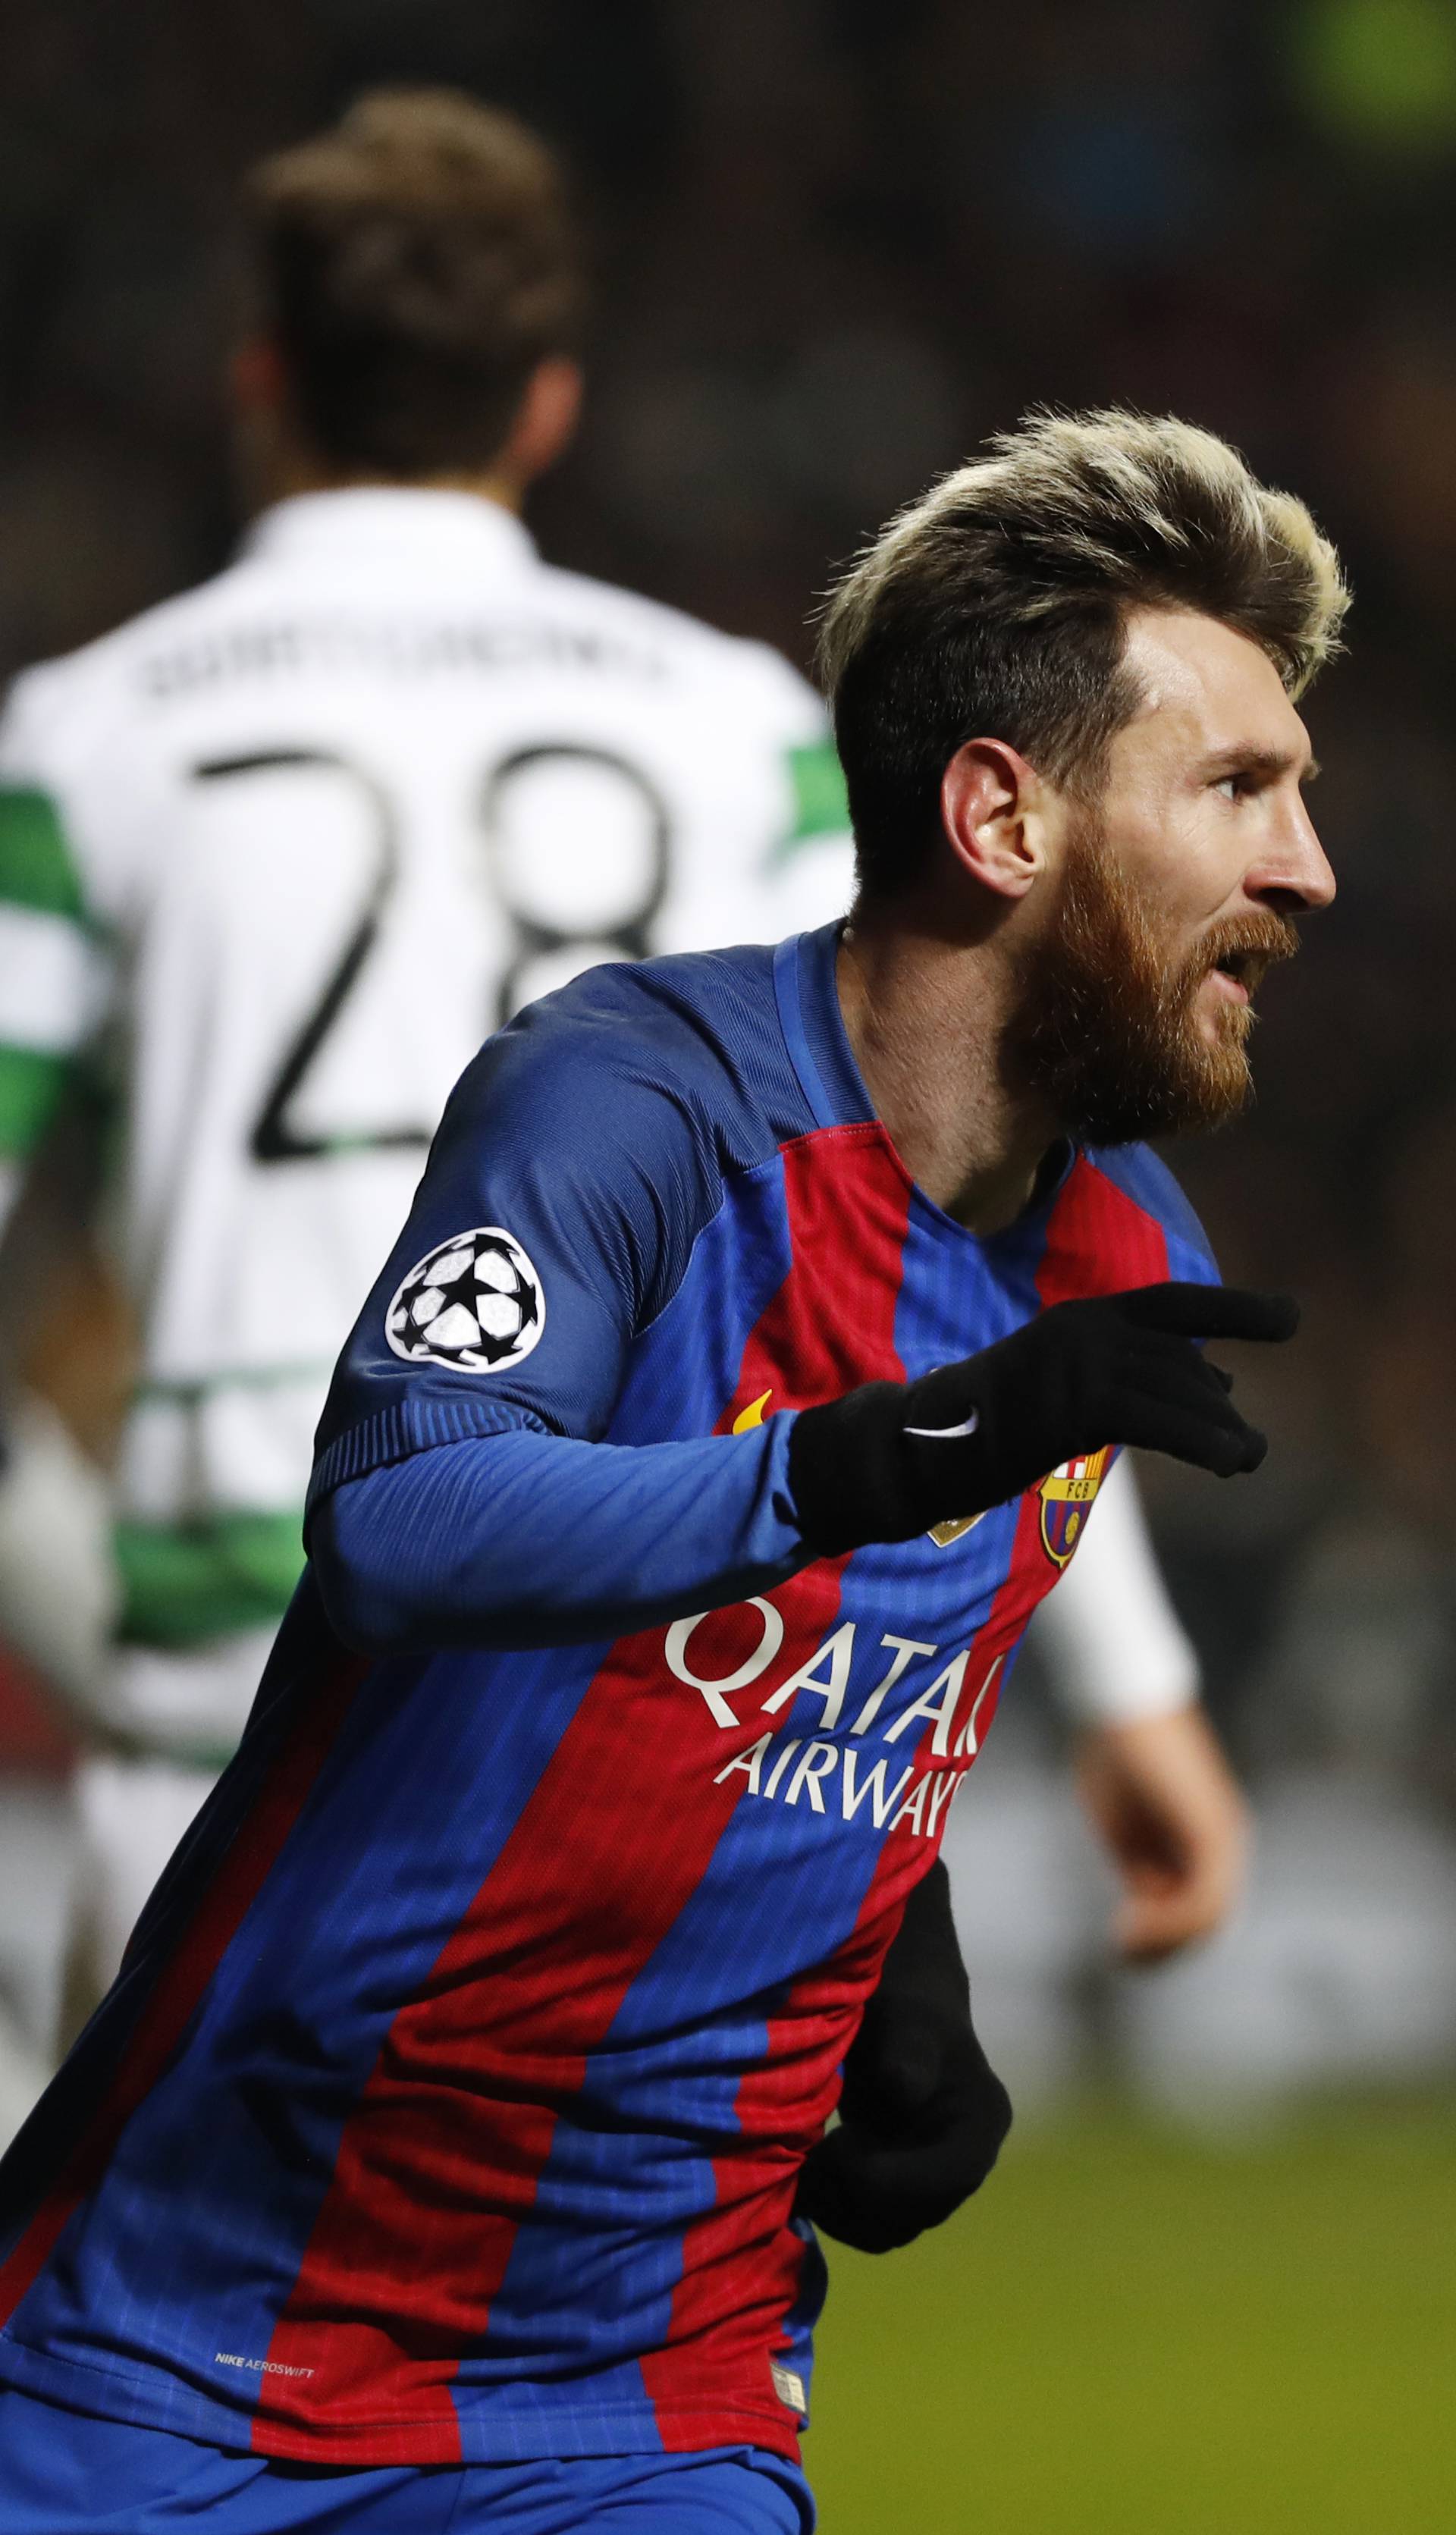 Barcelona's Lionel Messi celebrates scoring their first goal